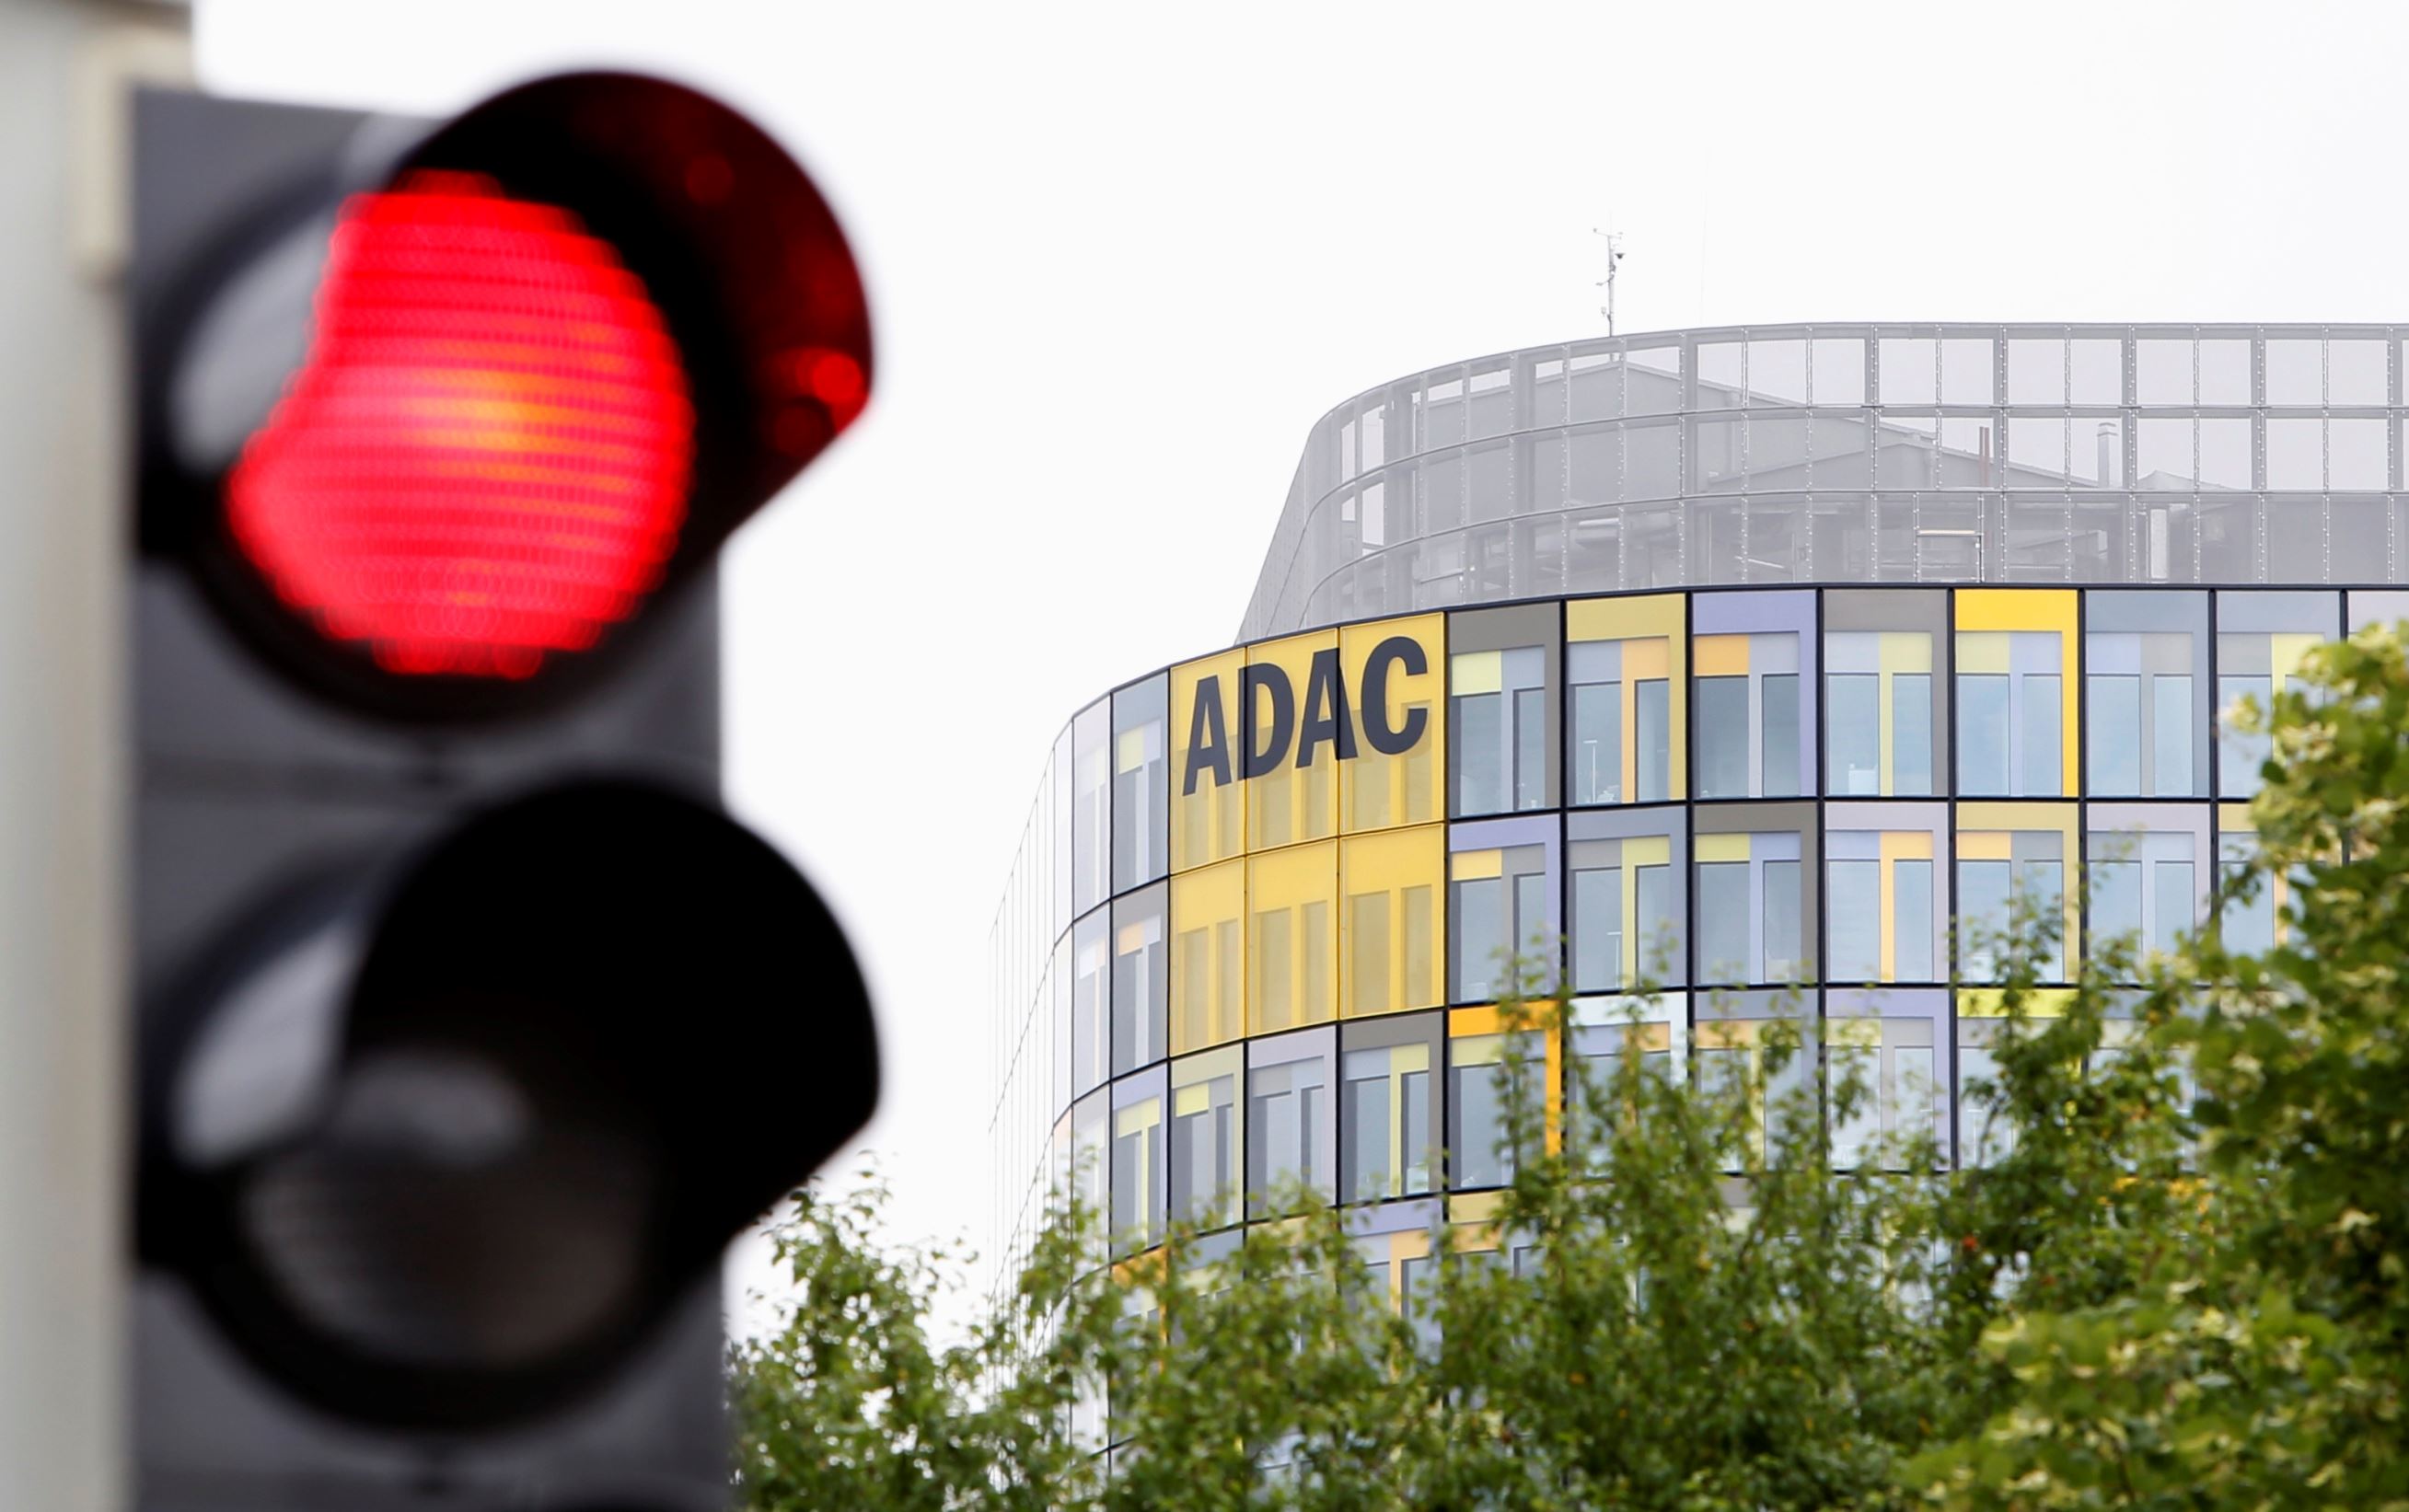 The ADAC headquarters triangular office tower is pictured next to a red traffic light before the annual news conference in Munich June 30, 2014. REUTERS/Michaela Rehle (GERMANY - Tags: BUSINESS CITYSCAPE POLITICS TRANSPORT)